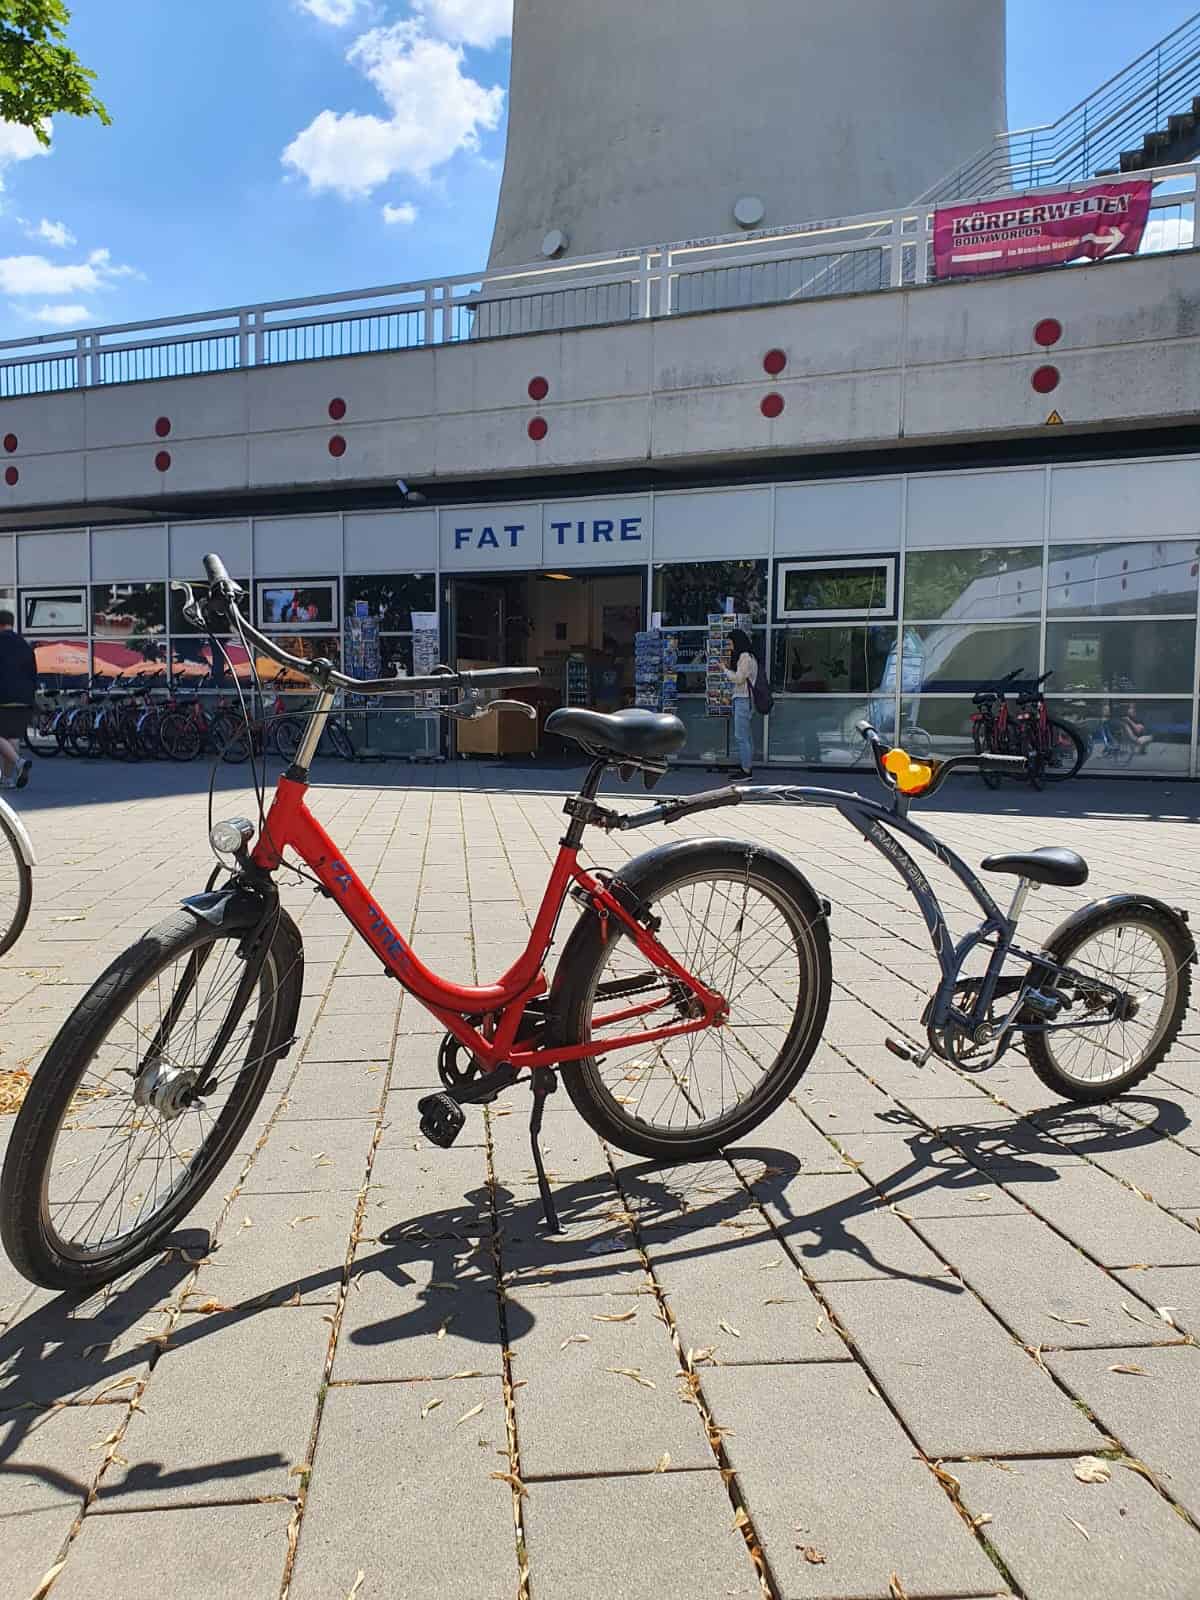 A red bicycle with a single-wheeled tandem attached